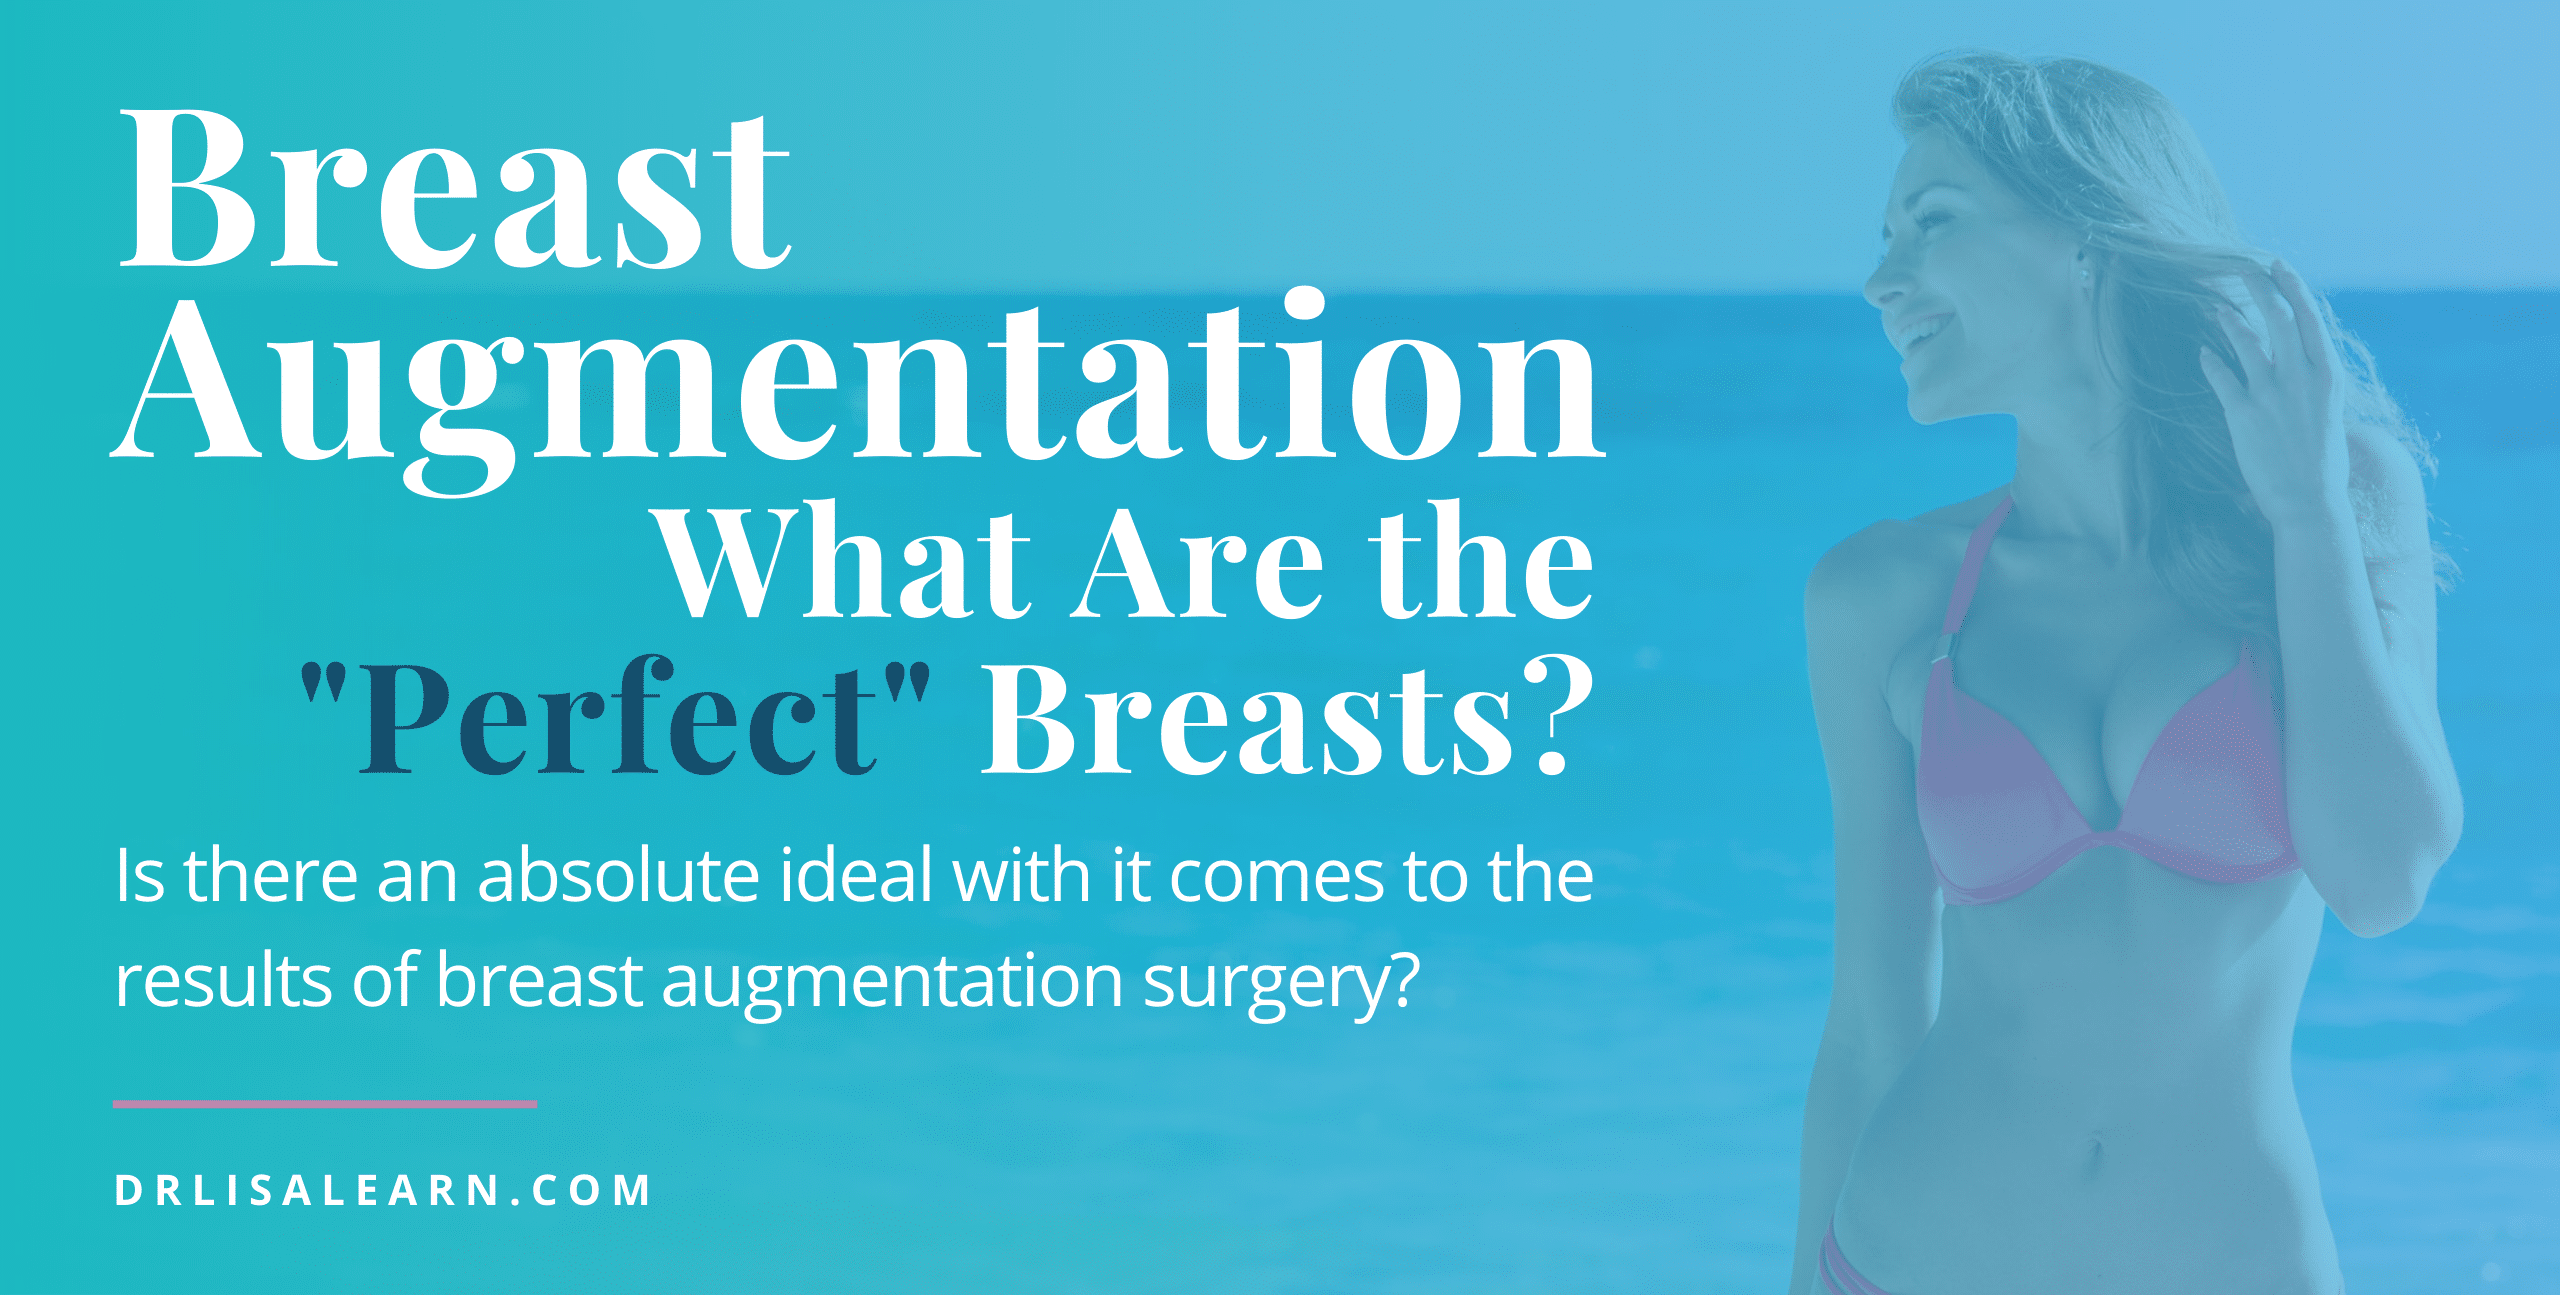 Breast Augmentation - What are the "perfect" breasts?